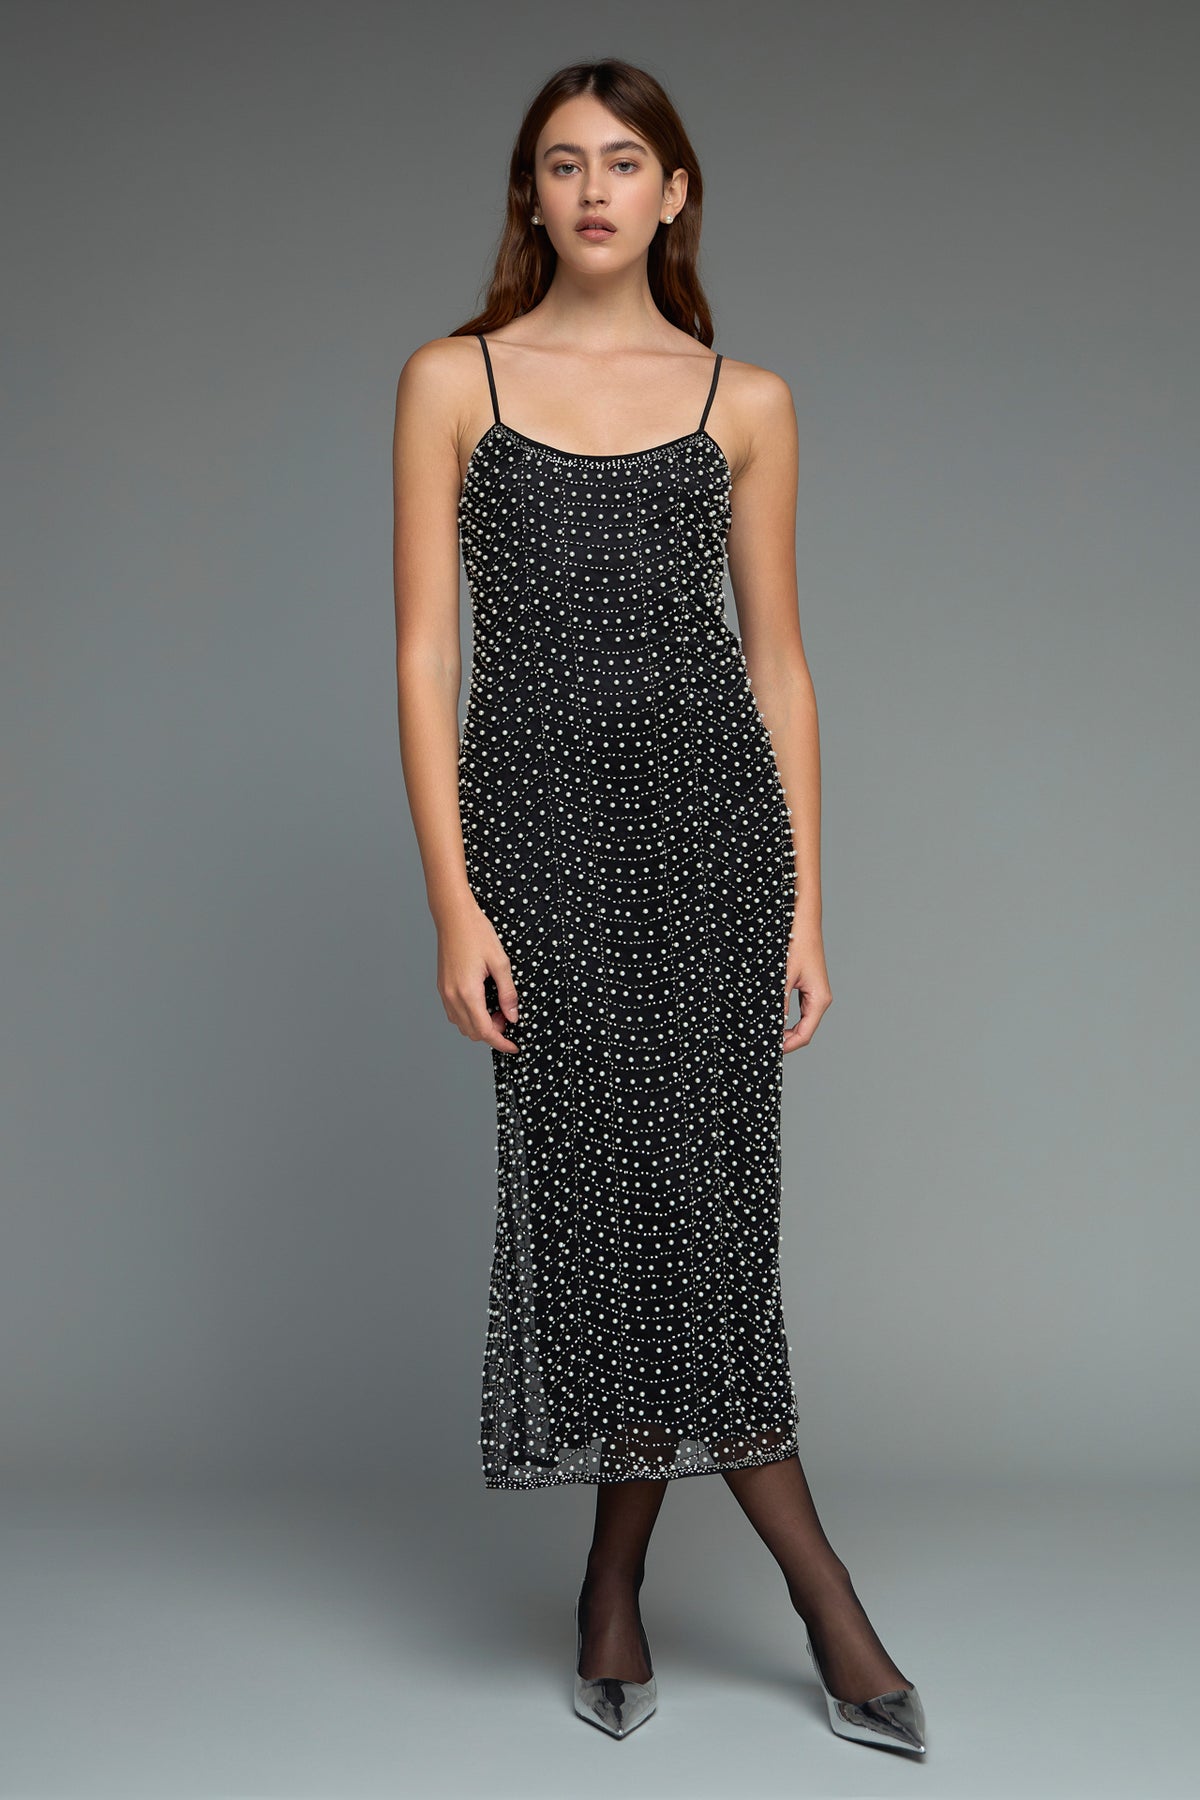 ENDLESS ROSE - Premium Pearl Beaded Maxi Dress - DRESSES available at Objectrare